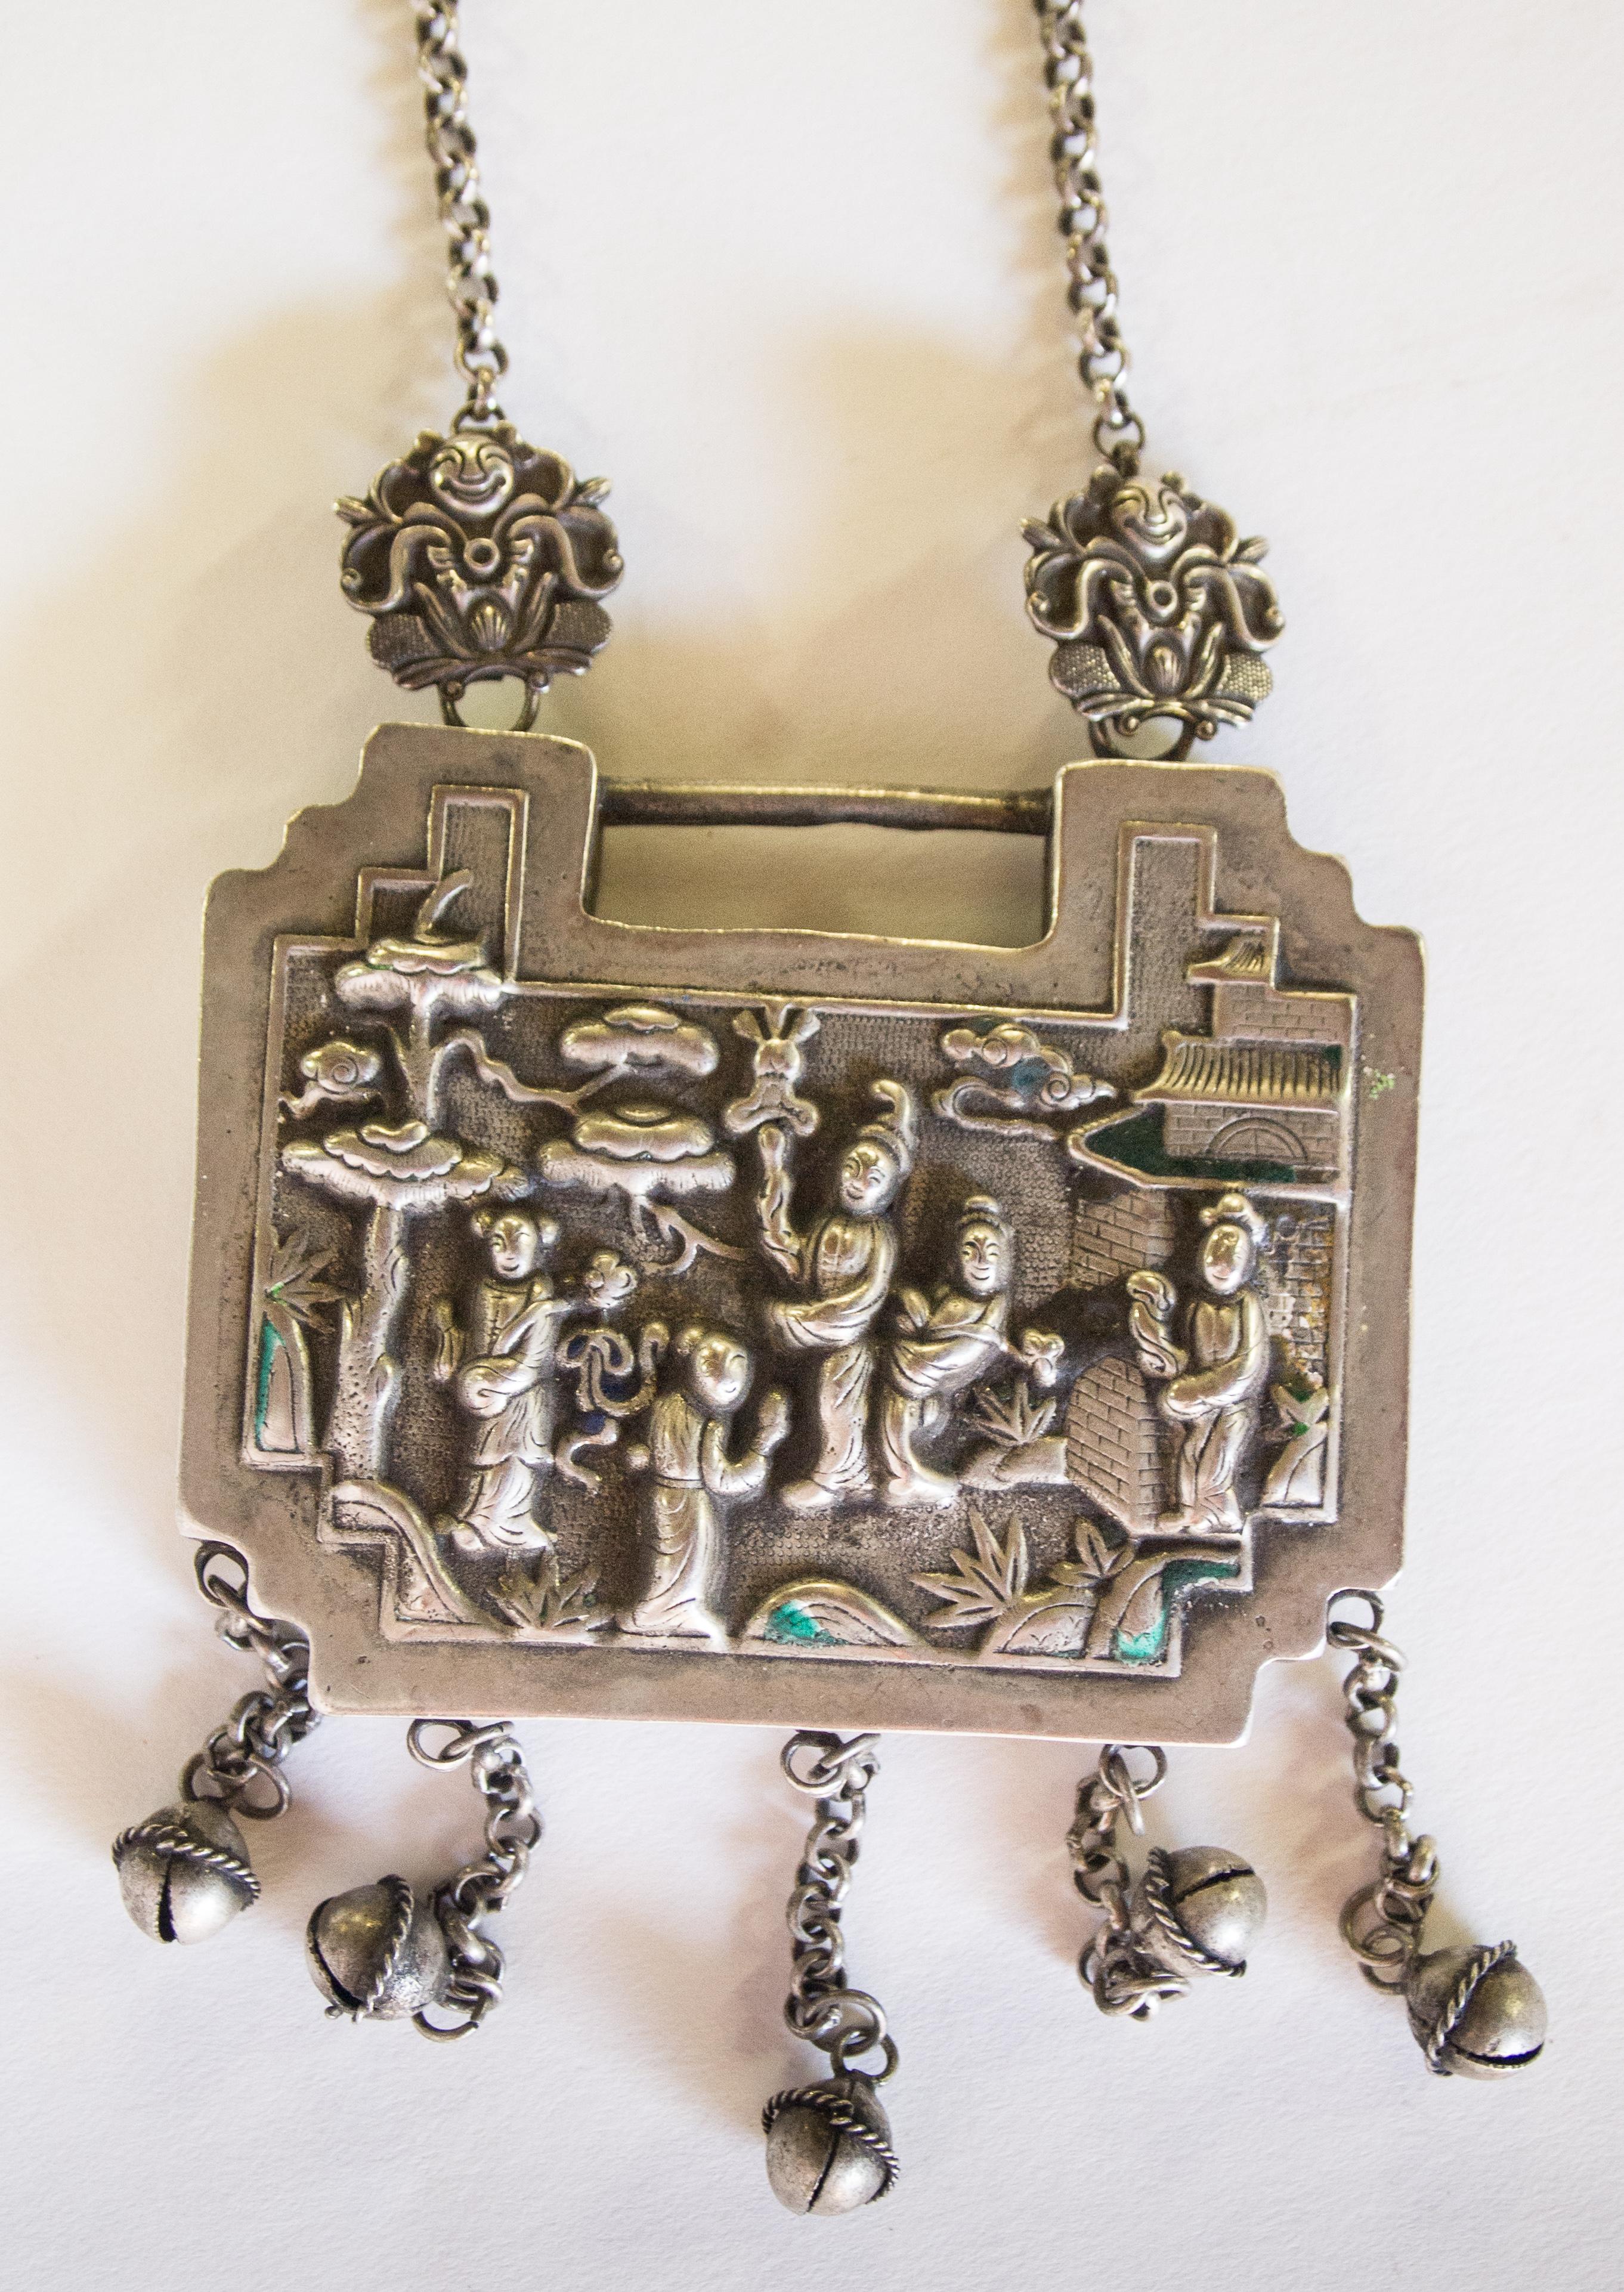 Child amulet lock necklace silver alloy with repousse work and hanging bells. Yao or Hmong of SW China, early 20th century. Fastened on a chain necklace.
This charming amulet necklace comes from the Yao or Hmong of Southwest China and features on